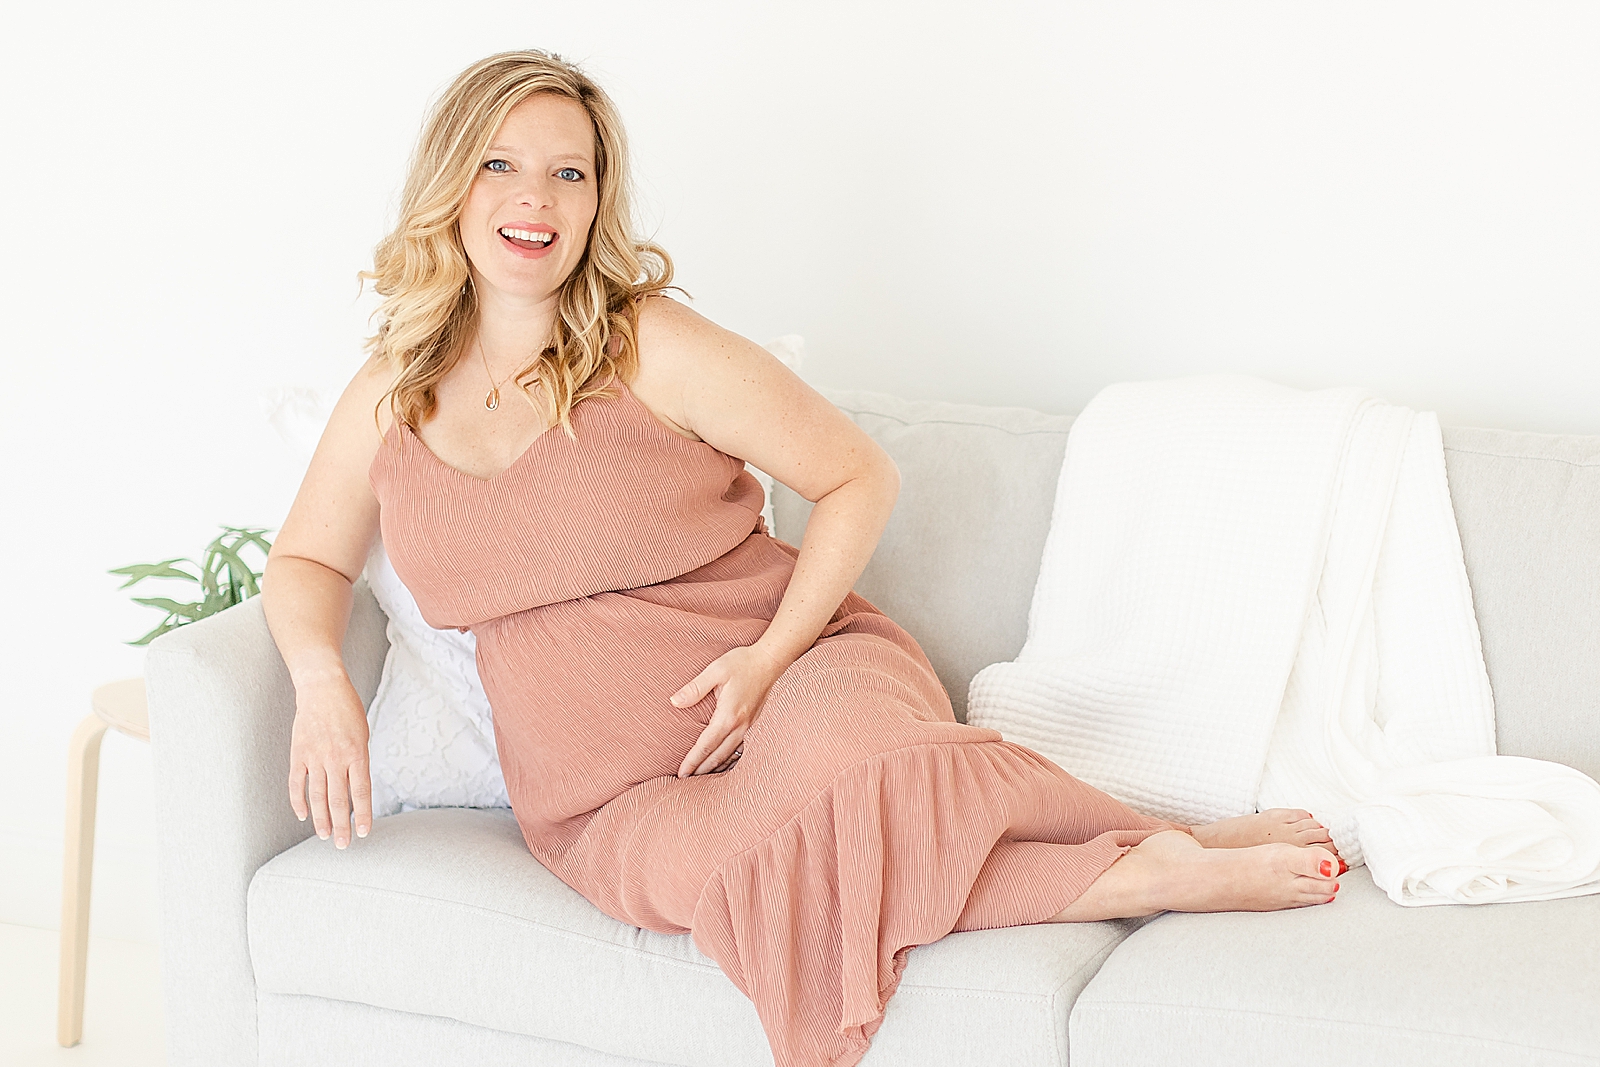 branding maternity photos of mom sitting on grey couch wearing dusty rose dress smiling at camera holding baby bump